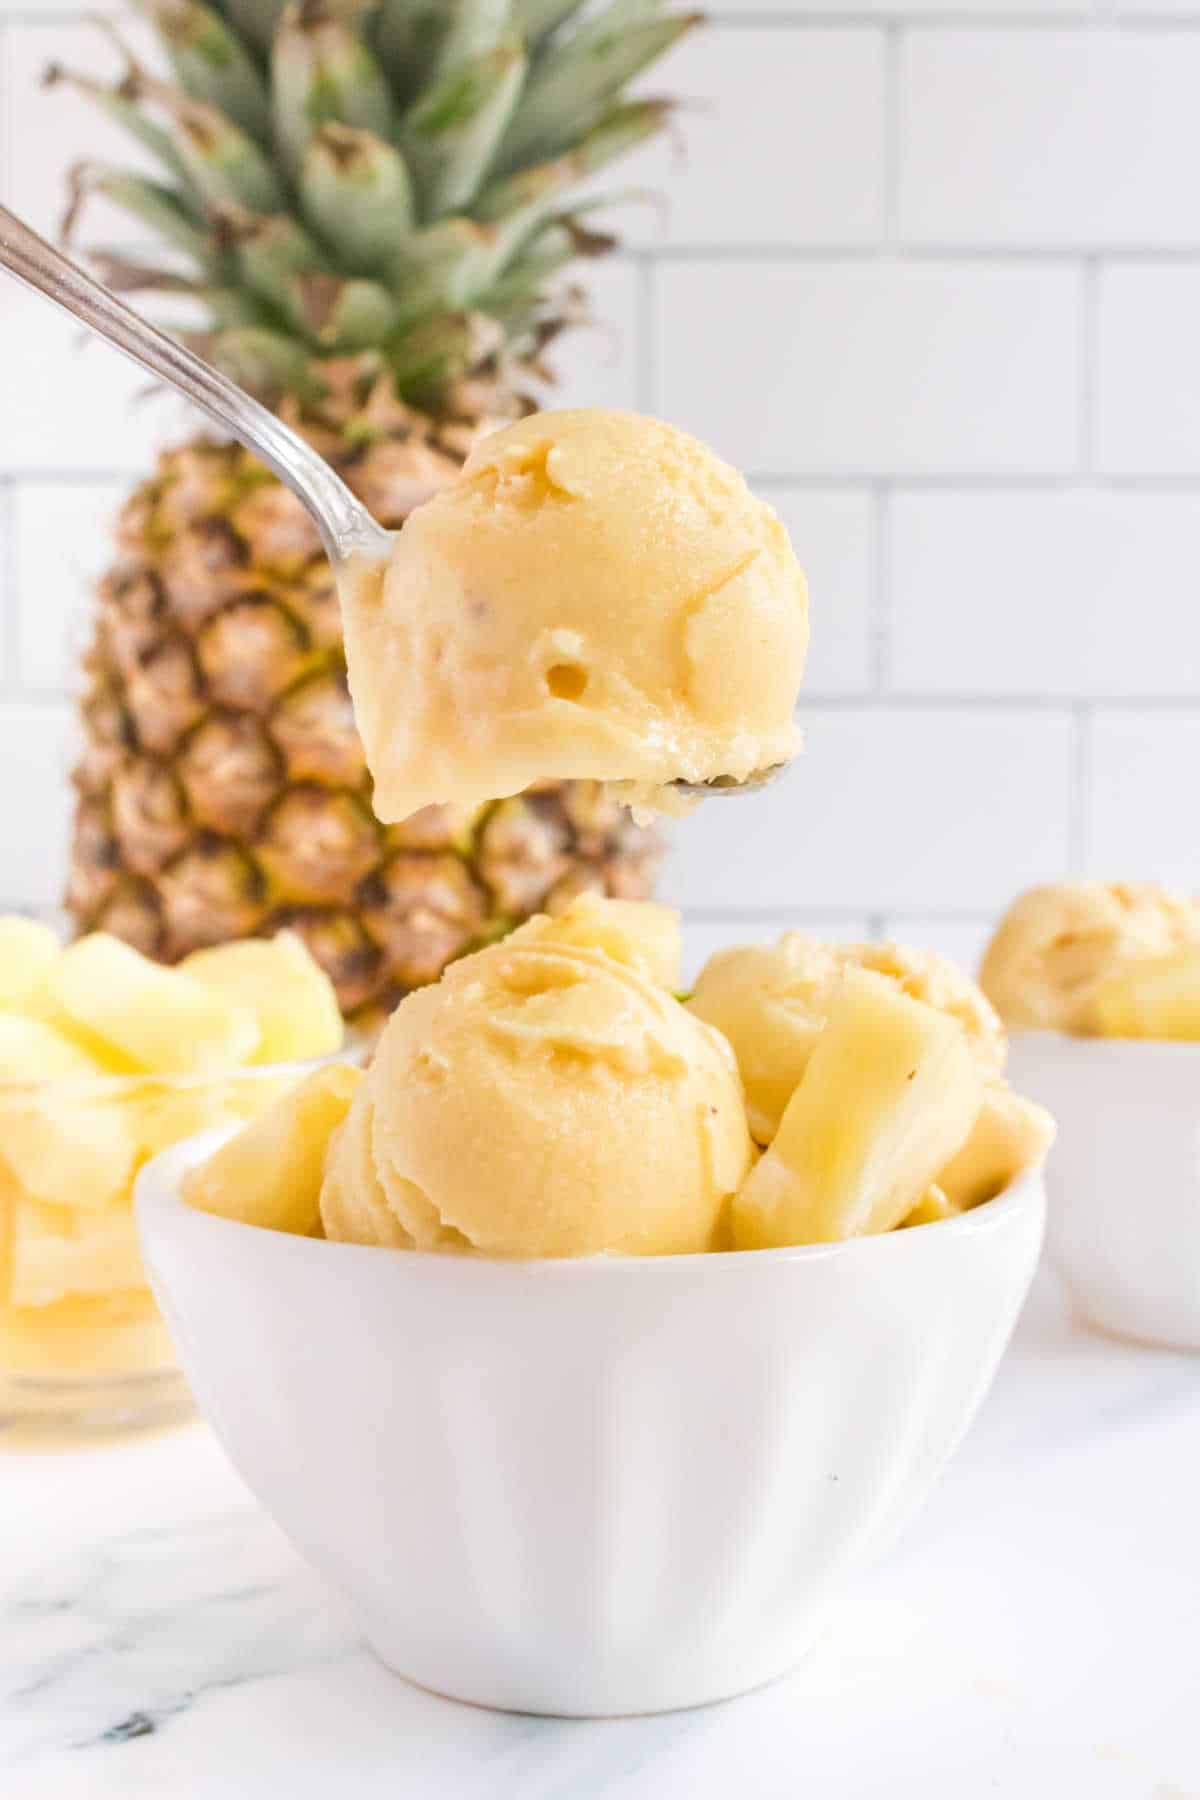 Pineapple ice cream on a spoon over a bowl of ice cream.